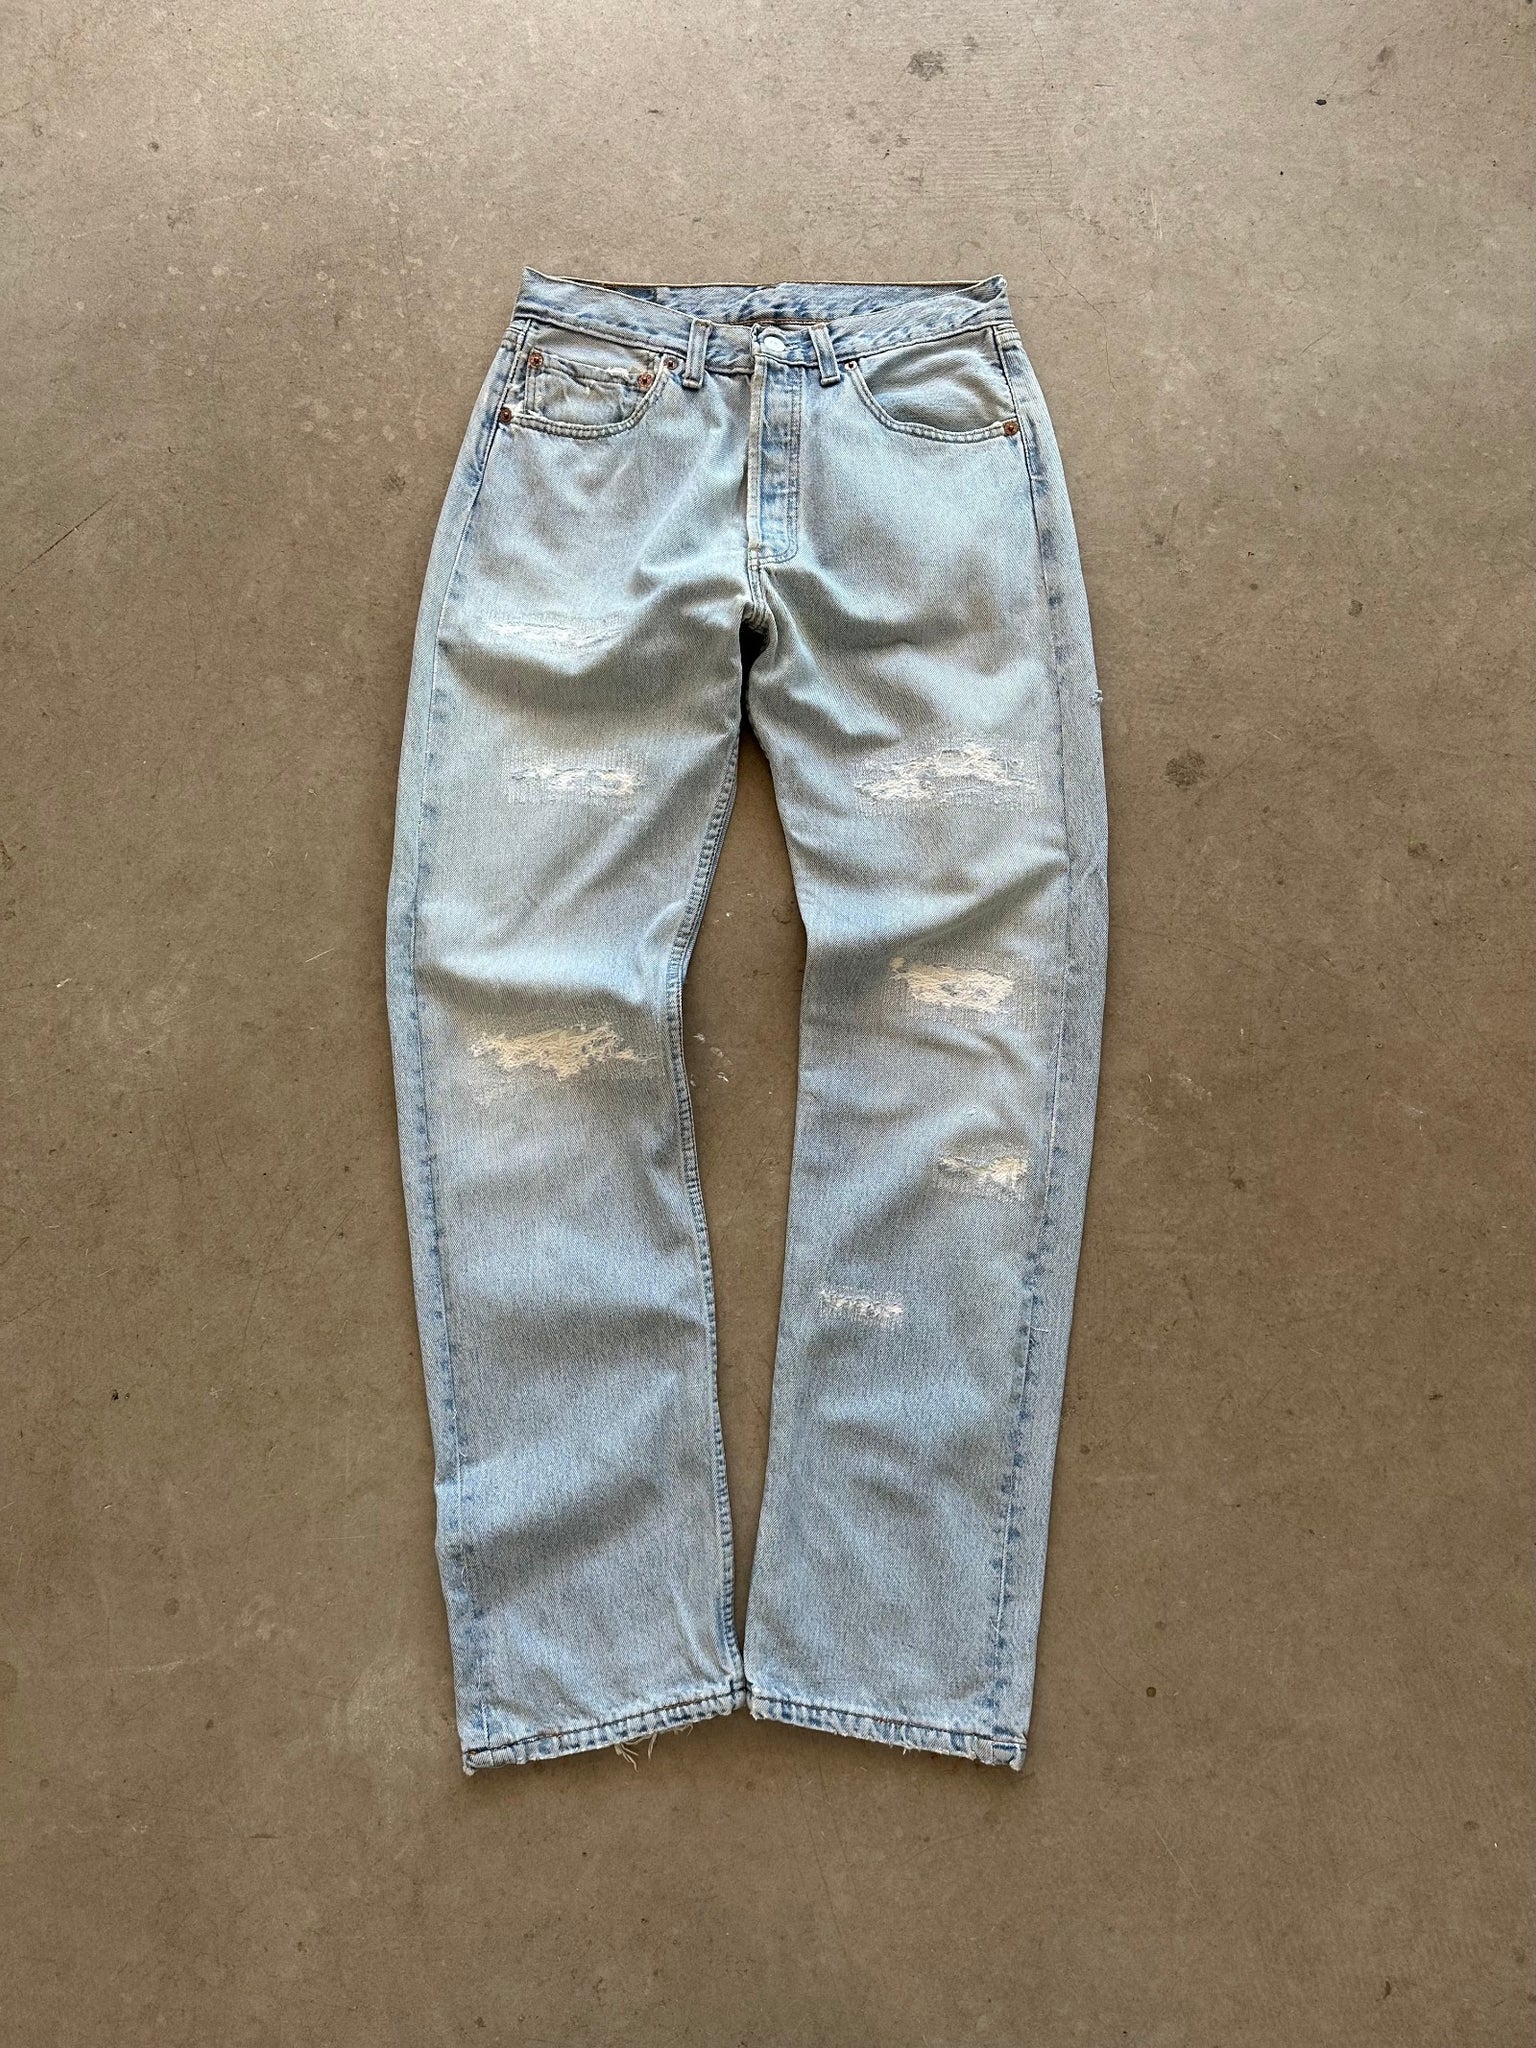 1990's Levis 501 Repaired Jeans - 31 x 32